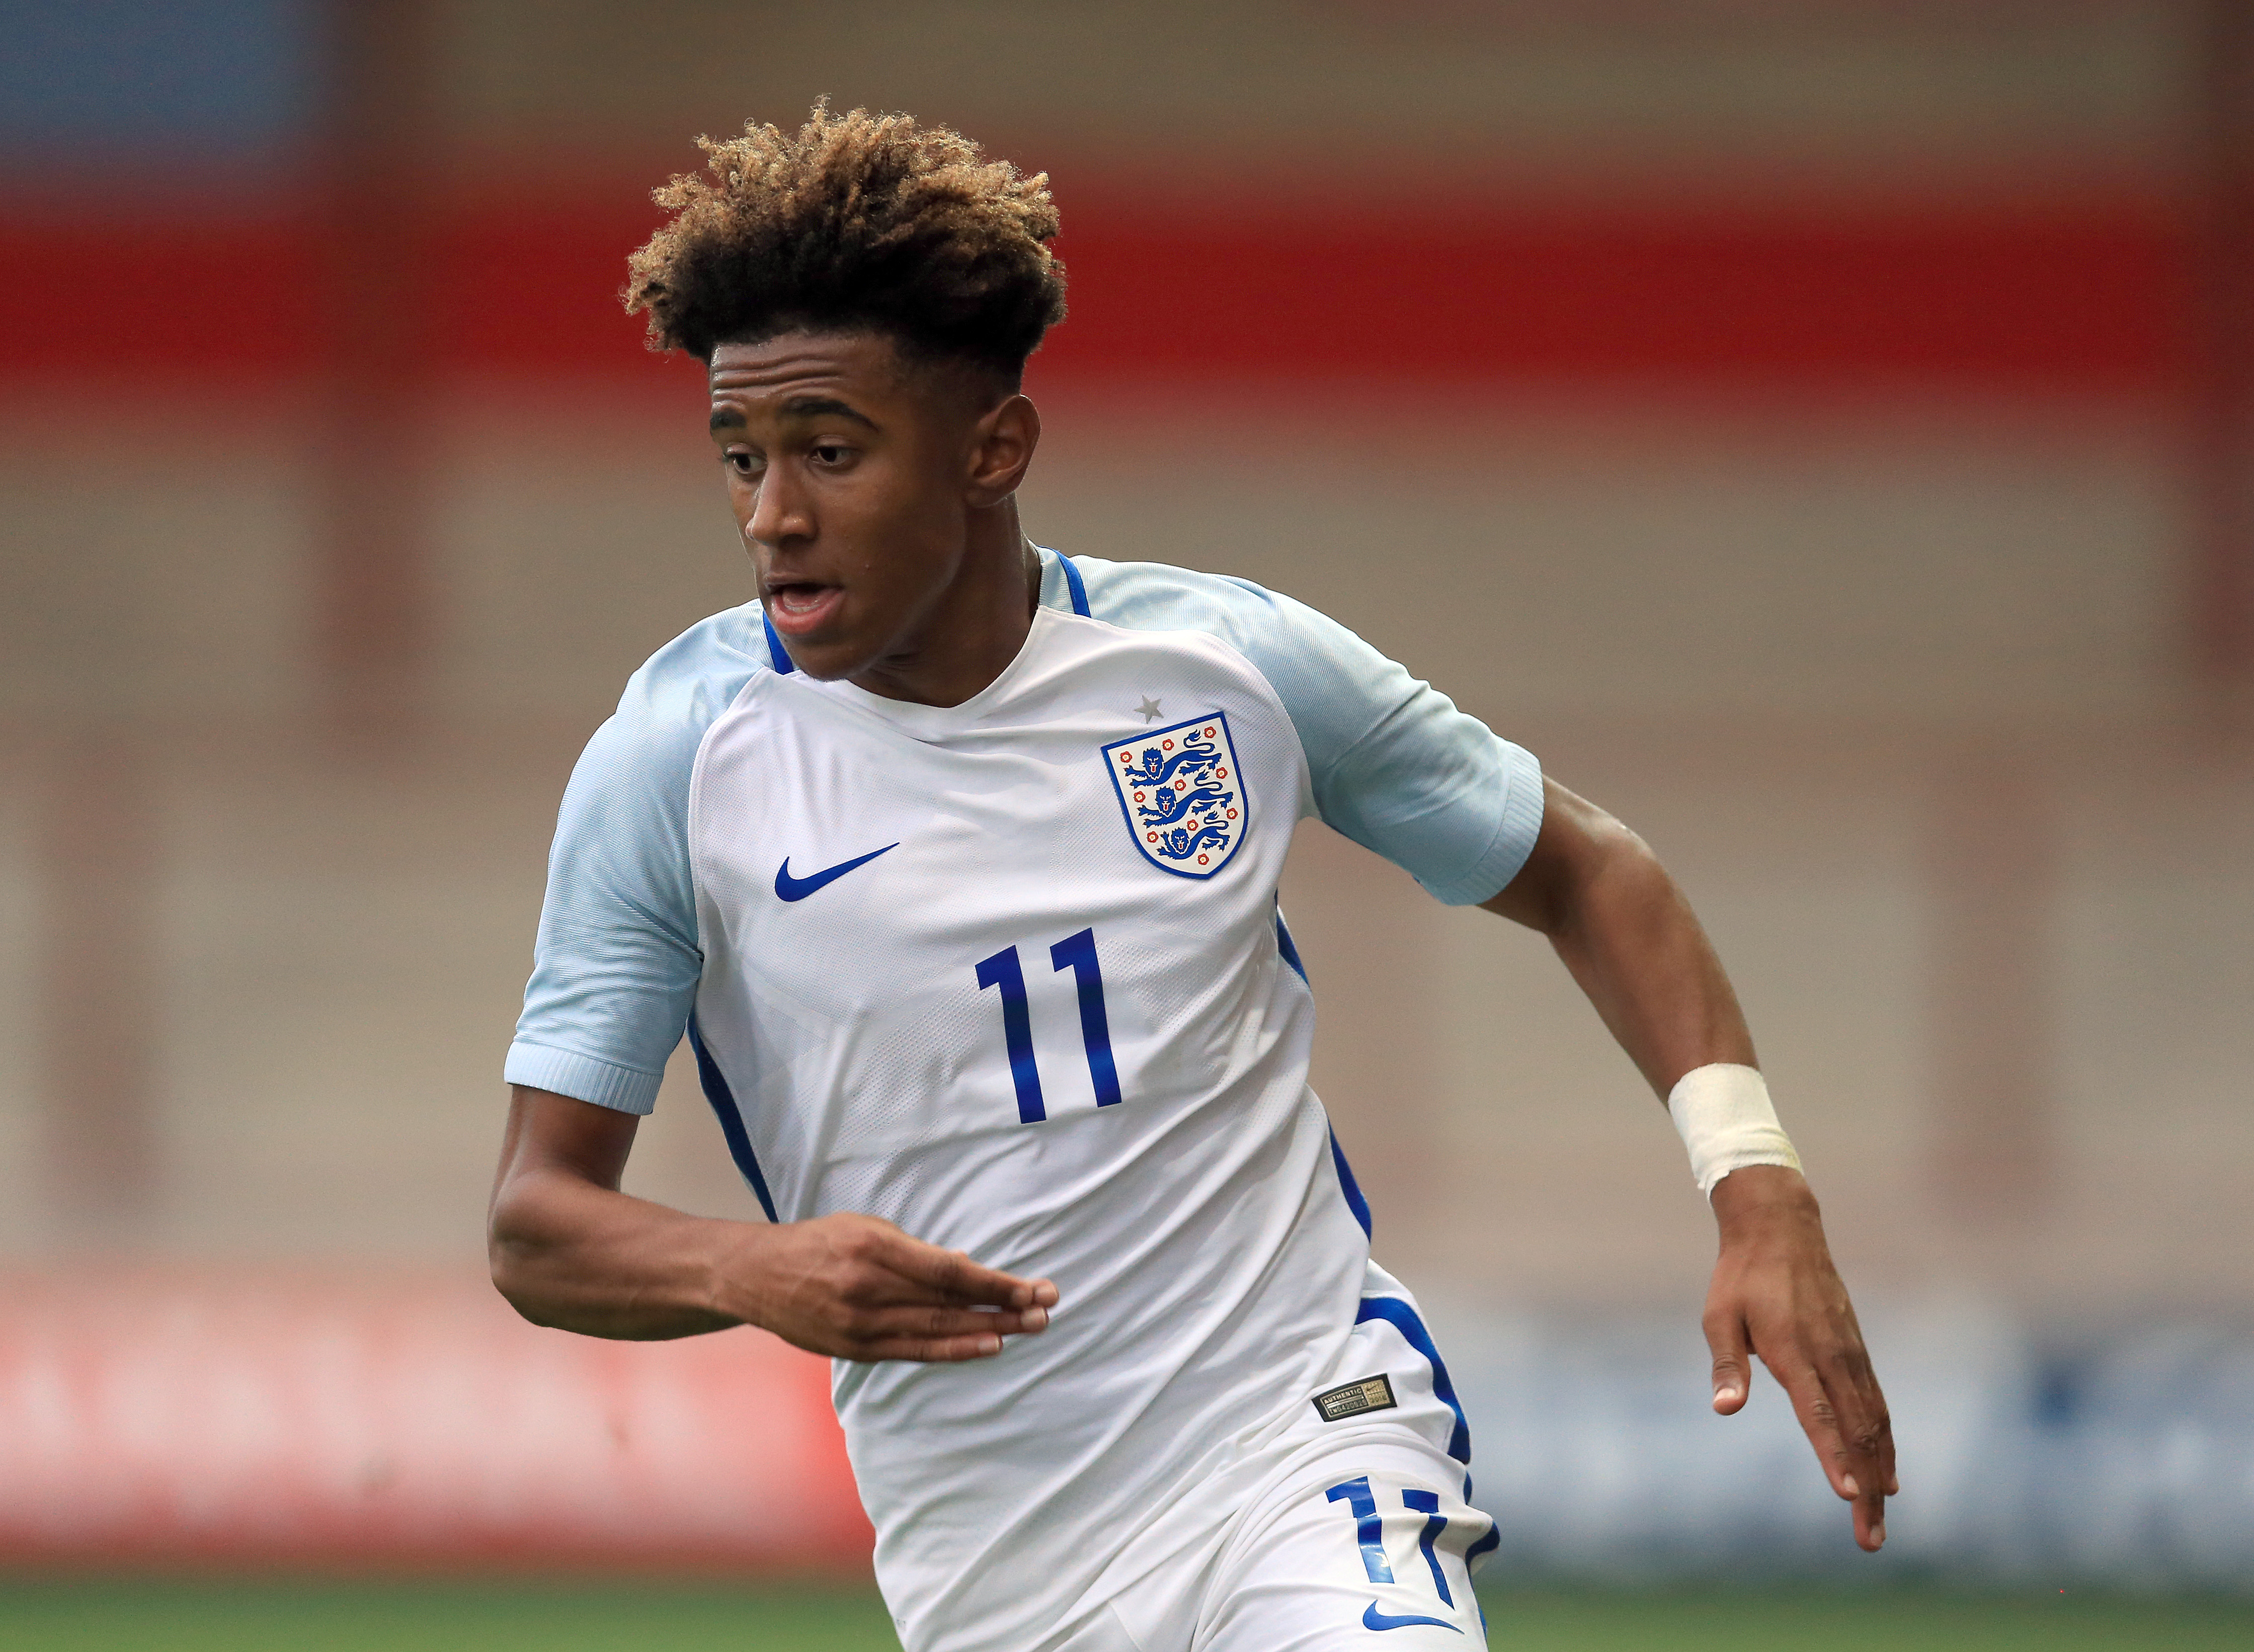 FLEETWOOD, ENGLAND - SEPTEMBER 01:  Reiss Nelson of England U18 during the international friendly match between England U18 and Italy U18 at Highbury Stadium on September 1, 2016 in Fleetwood, United Kingdom. (Photo by Clint Hughes/Getty Images)